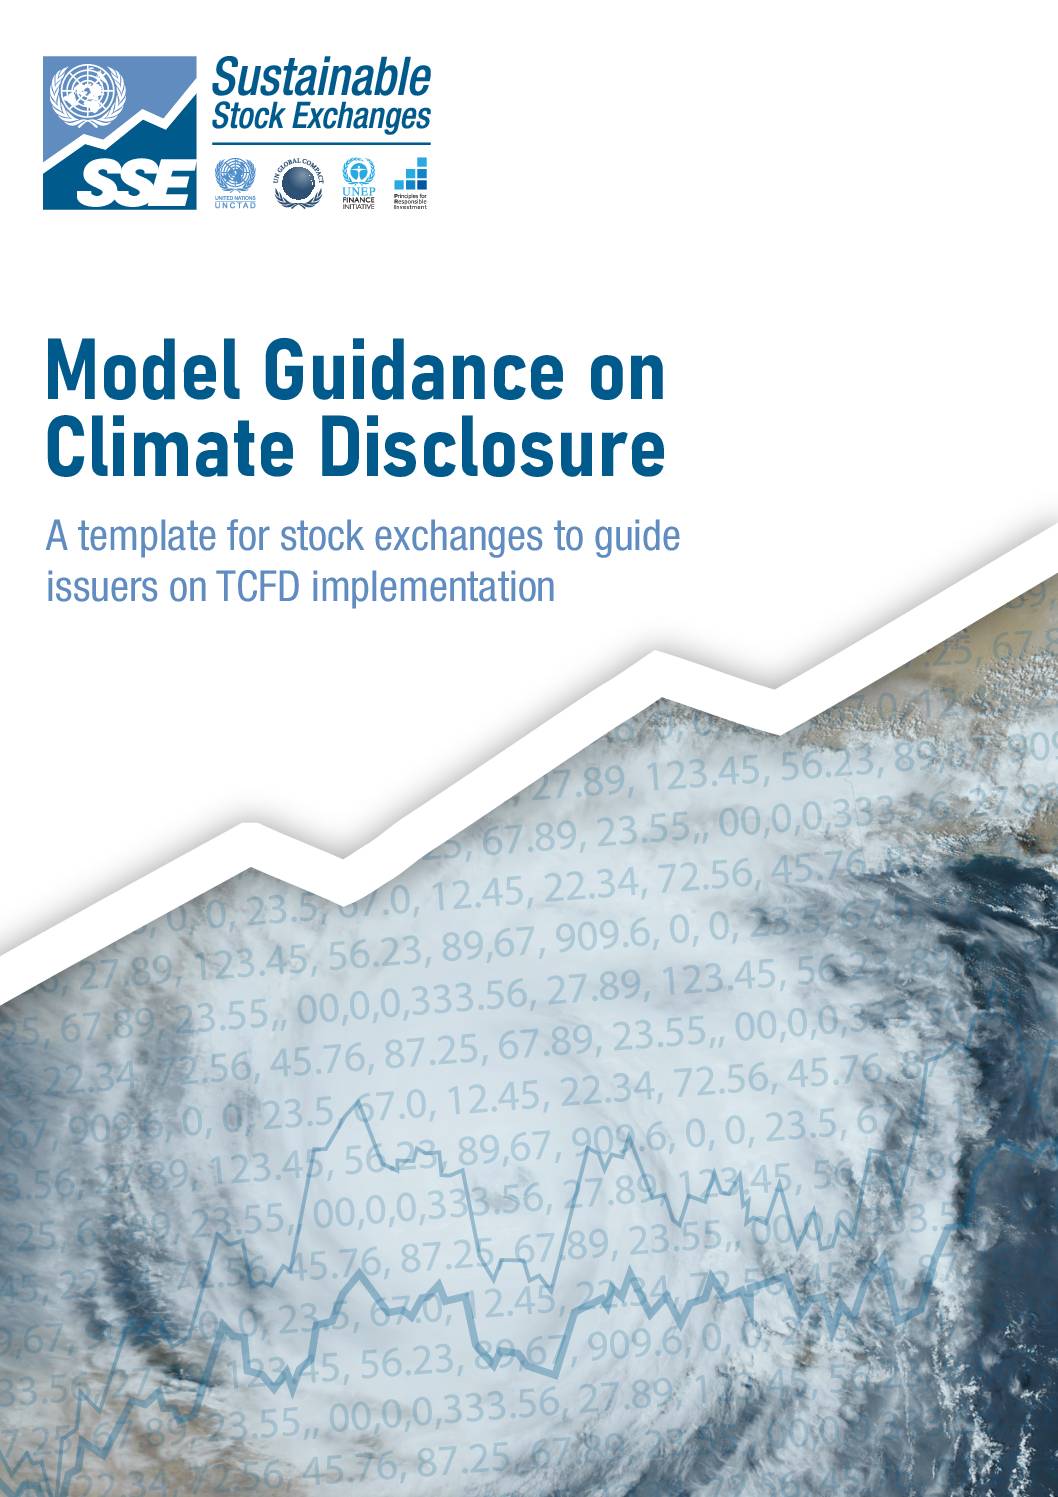 Model Guidance on Climate Disclosure: A Template for Stock Exchanges to Guide Issuers on TCFD Implementation